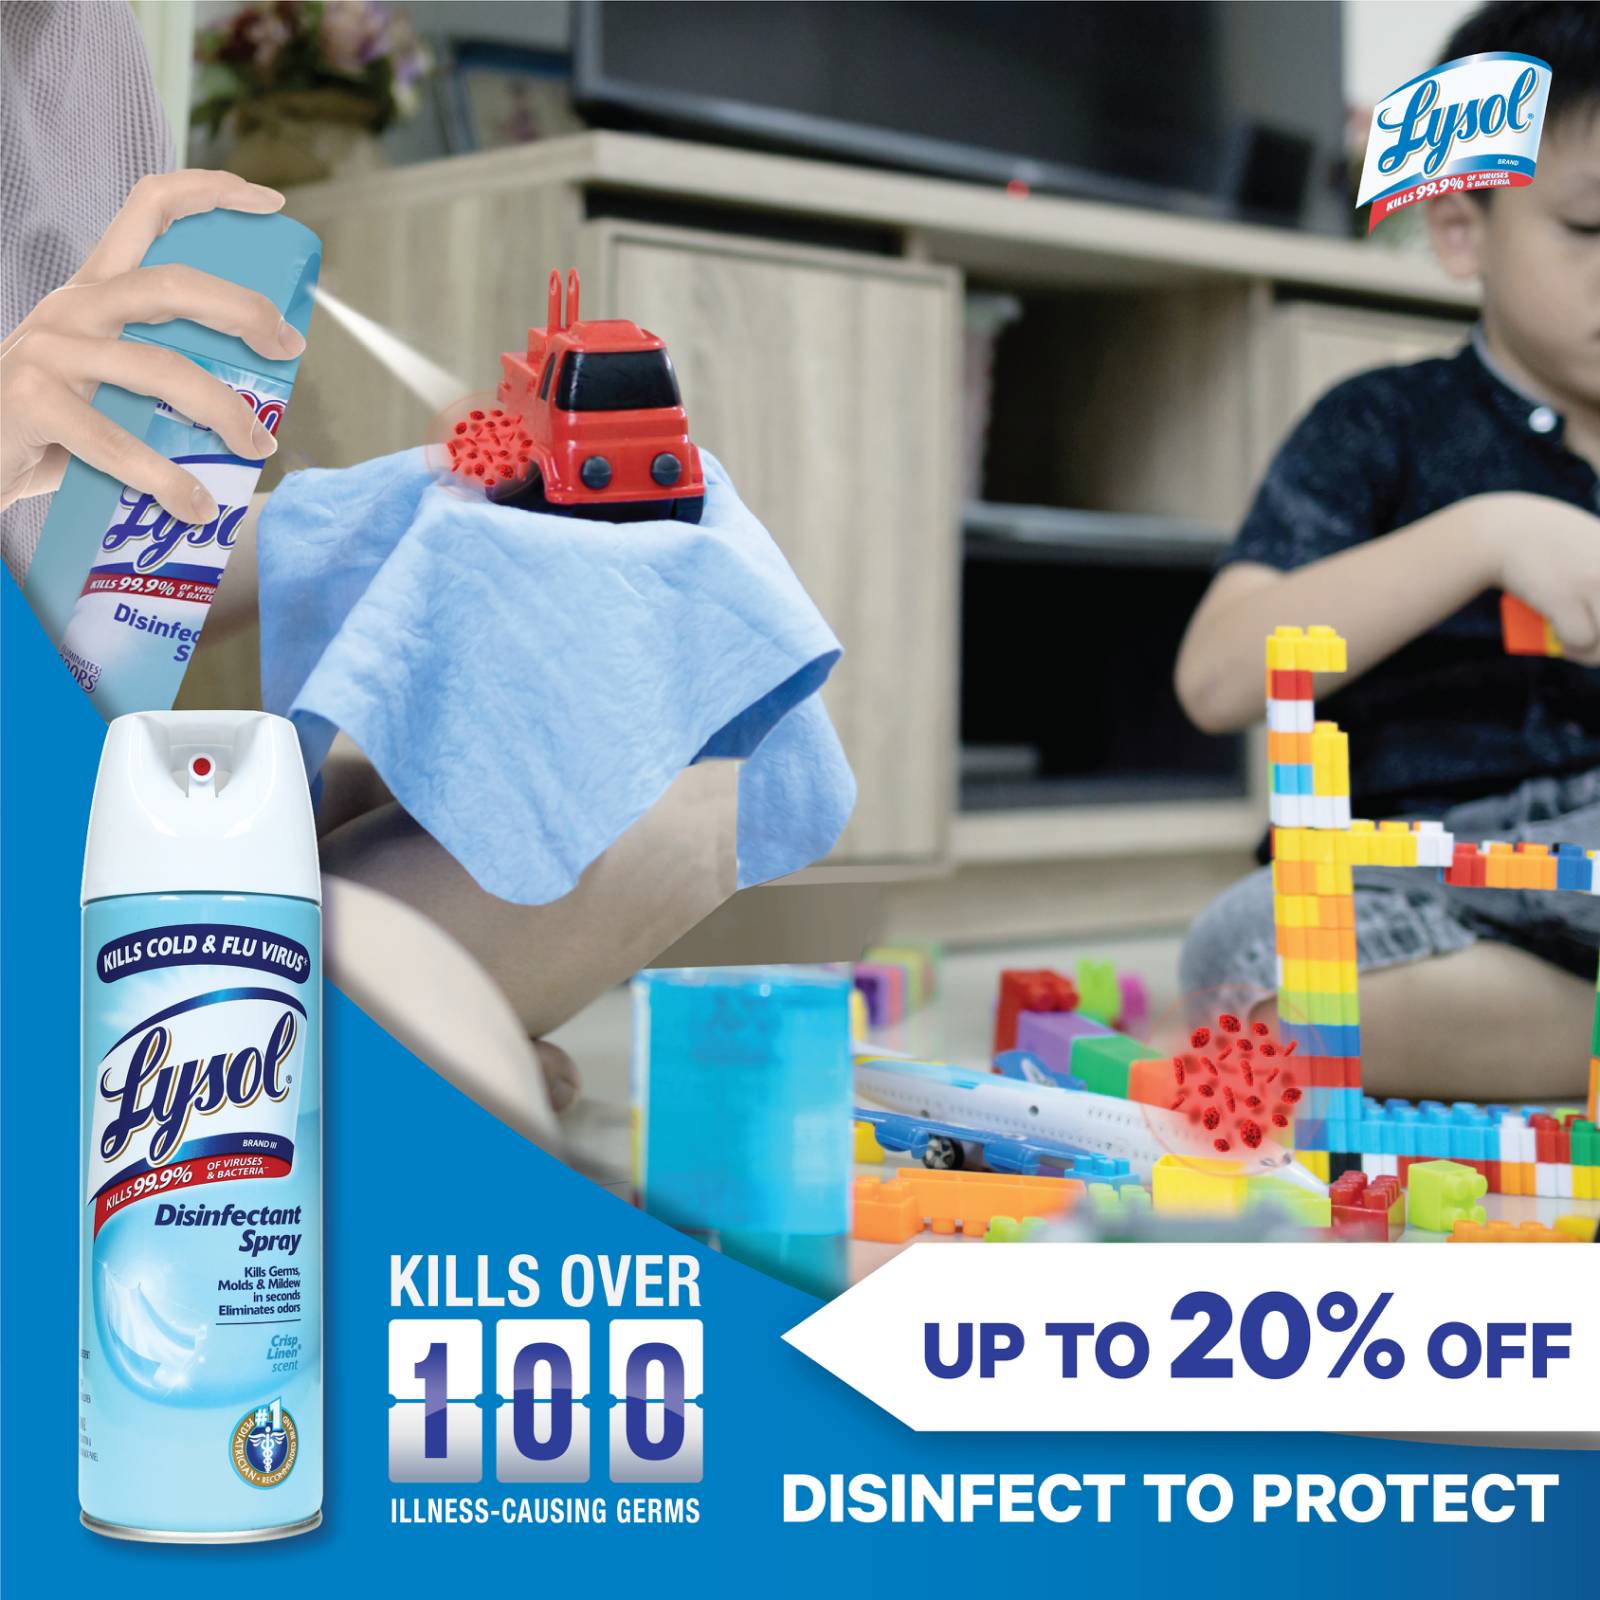 discounts-and-generous-rebates-on-lysol-disinfectant-spray-and-multi